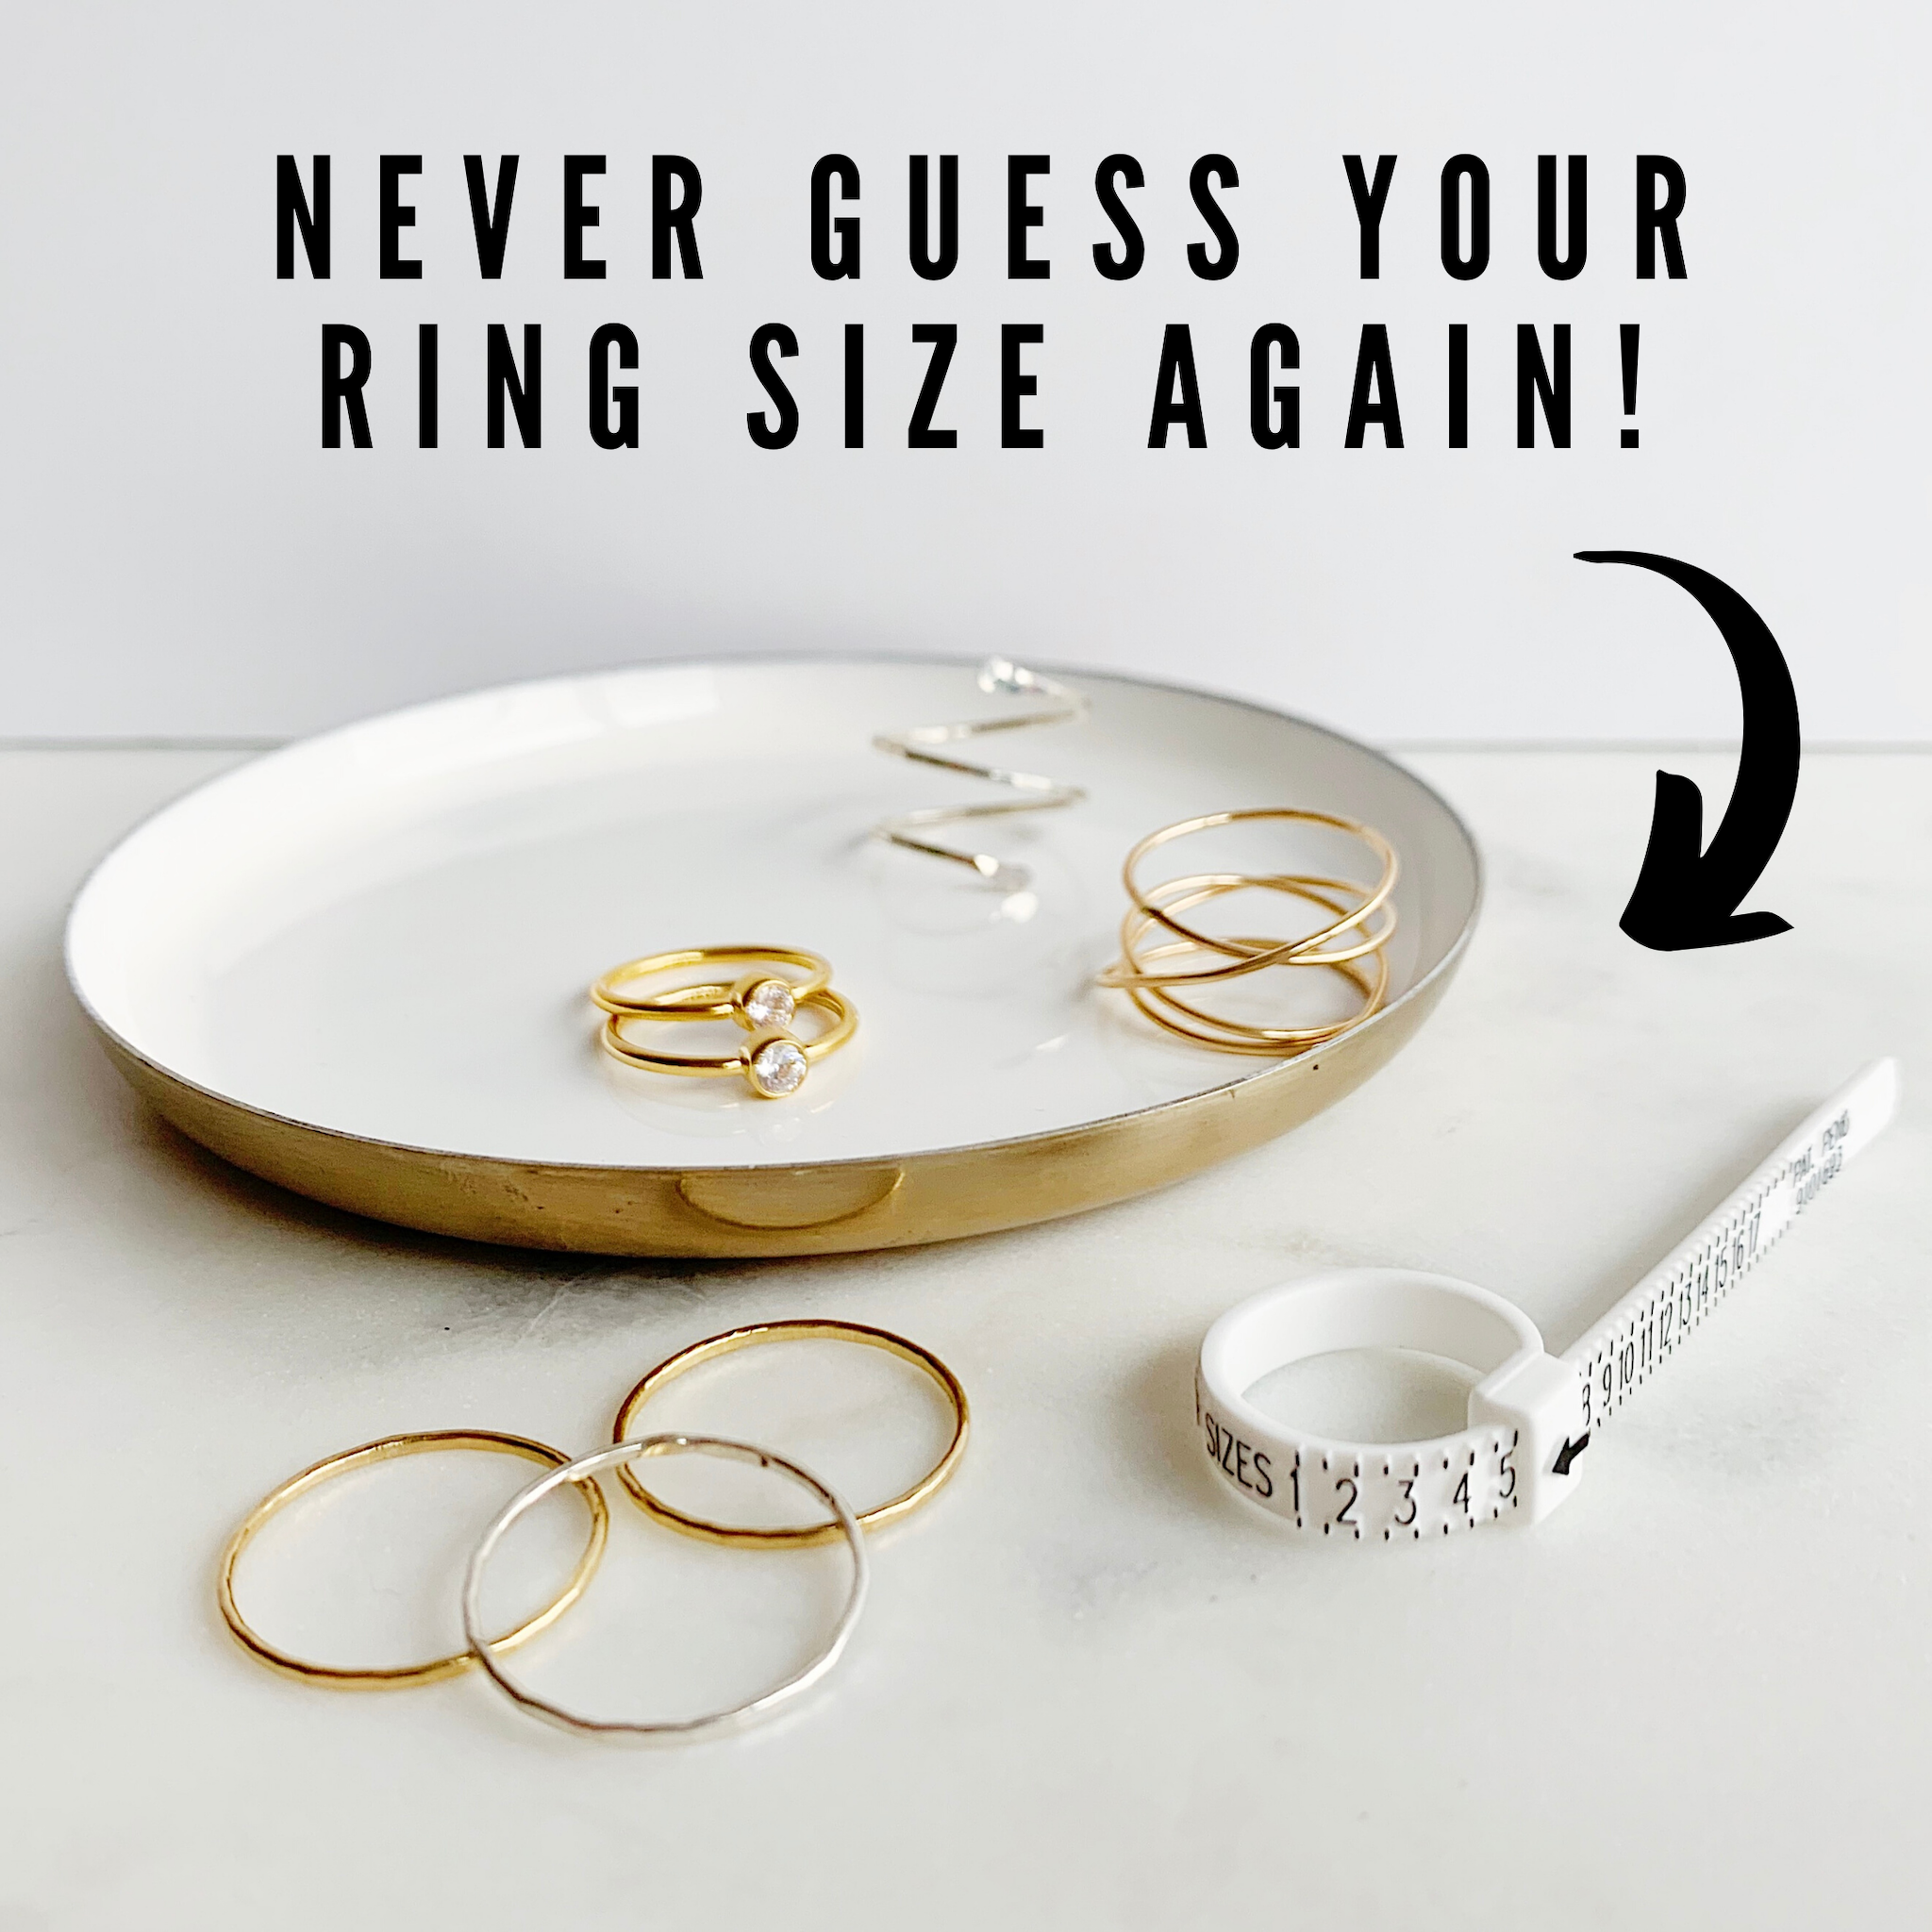 Help please with ring-sizing trouble!